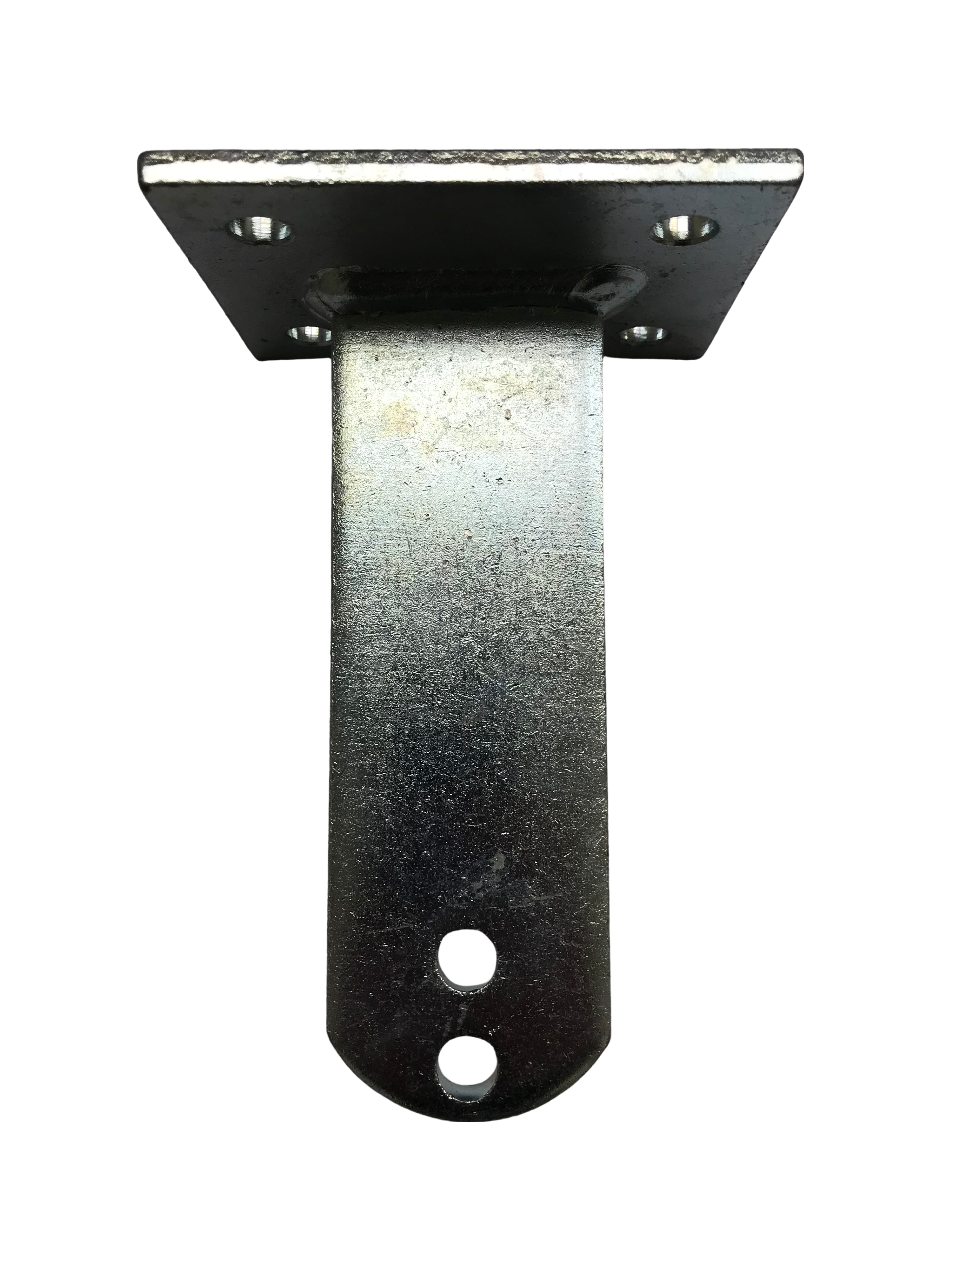 REAR BRACKET - For JET and COUPER